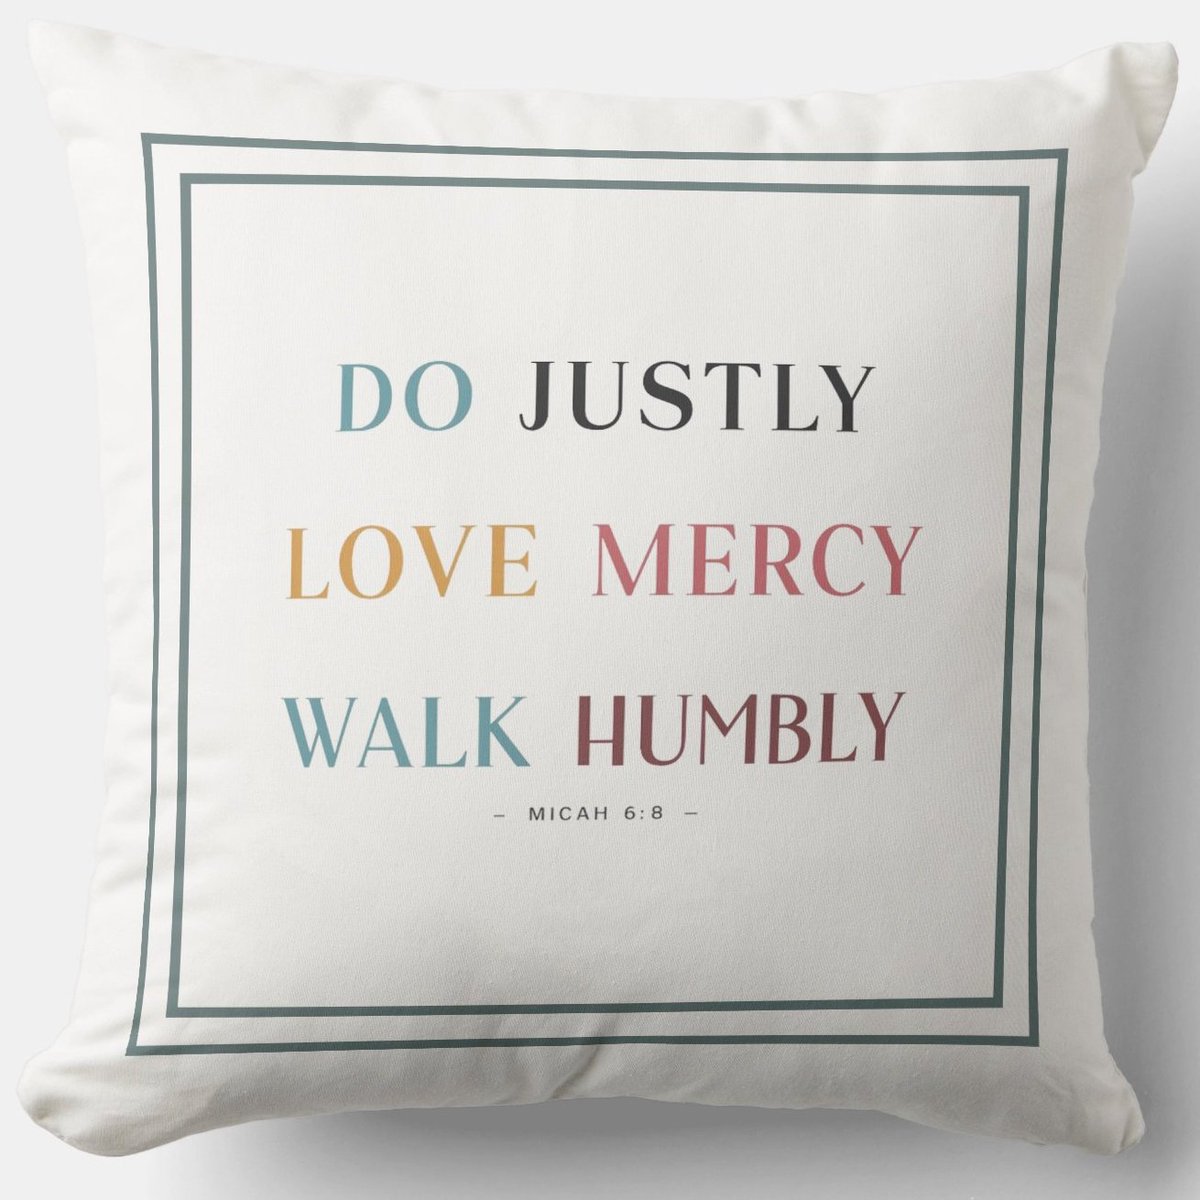 Do Justly Love Mercy Walk Humbly: Micah 6:8 zazzle.com/do_justly_love… Throw #Pillow #Blessing #JesusChrist #JesusSaves #Jesus #christian #spiritual #Homedecoration #uniquegift #giftideas #MothersDayGifts #giftformom #giftidea #HolySpirit #pillows #giftshop #giftsforher #giftsformom